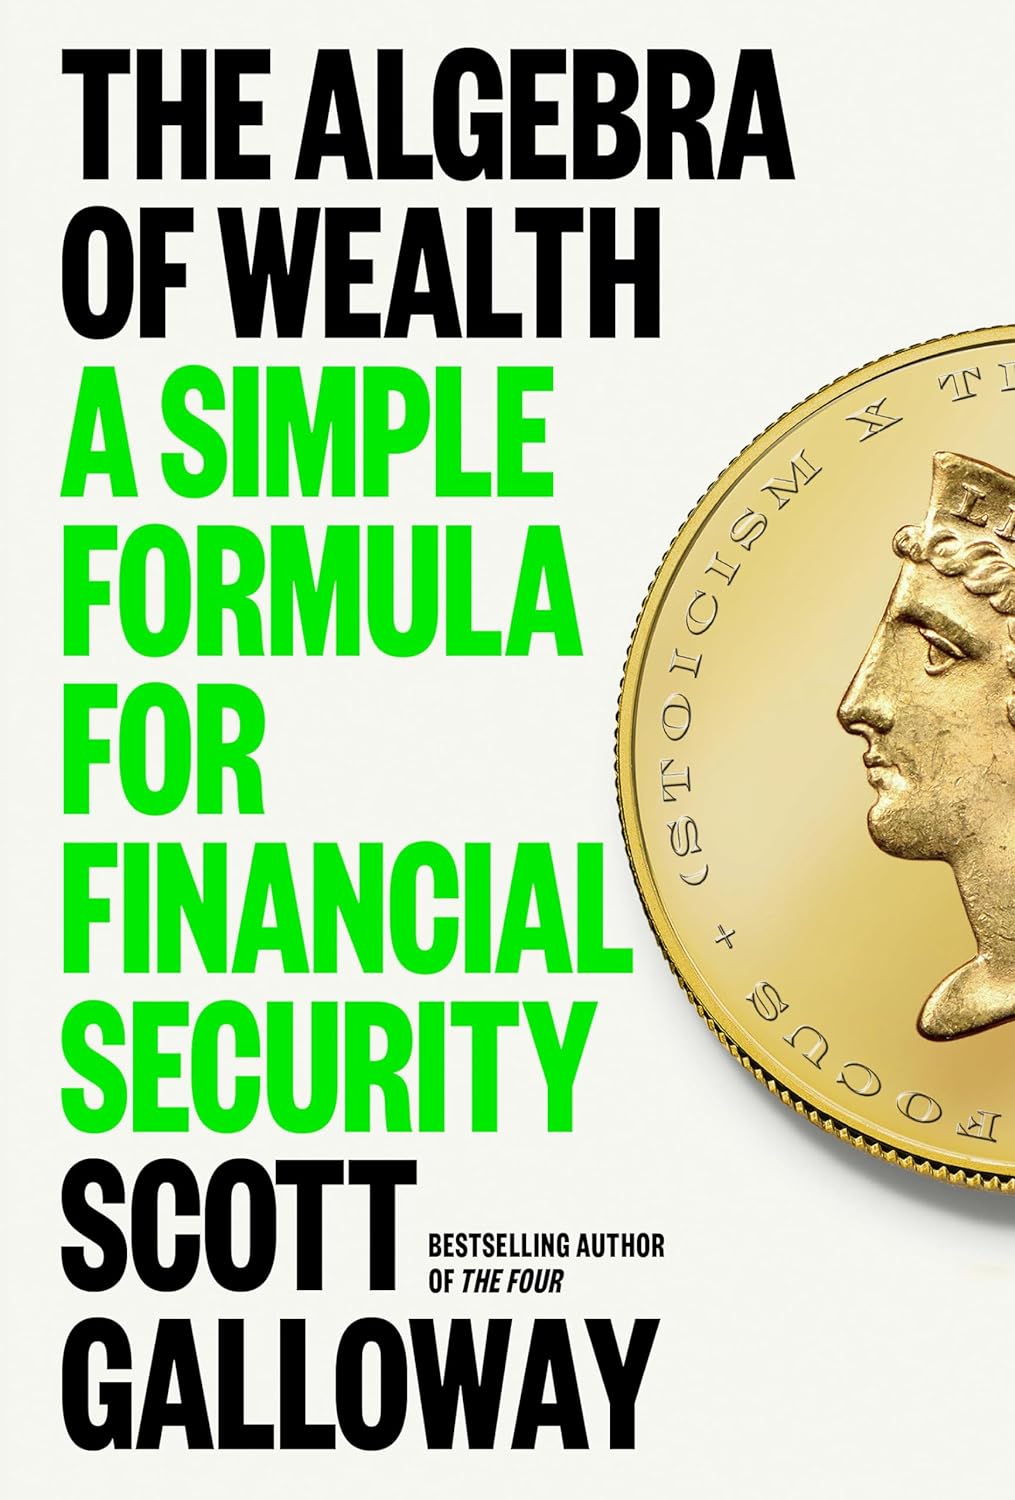 The Algebra of Wealth: A Simple Formula for Success, by Scott Galloway